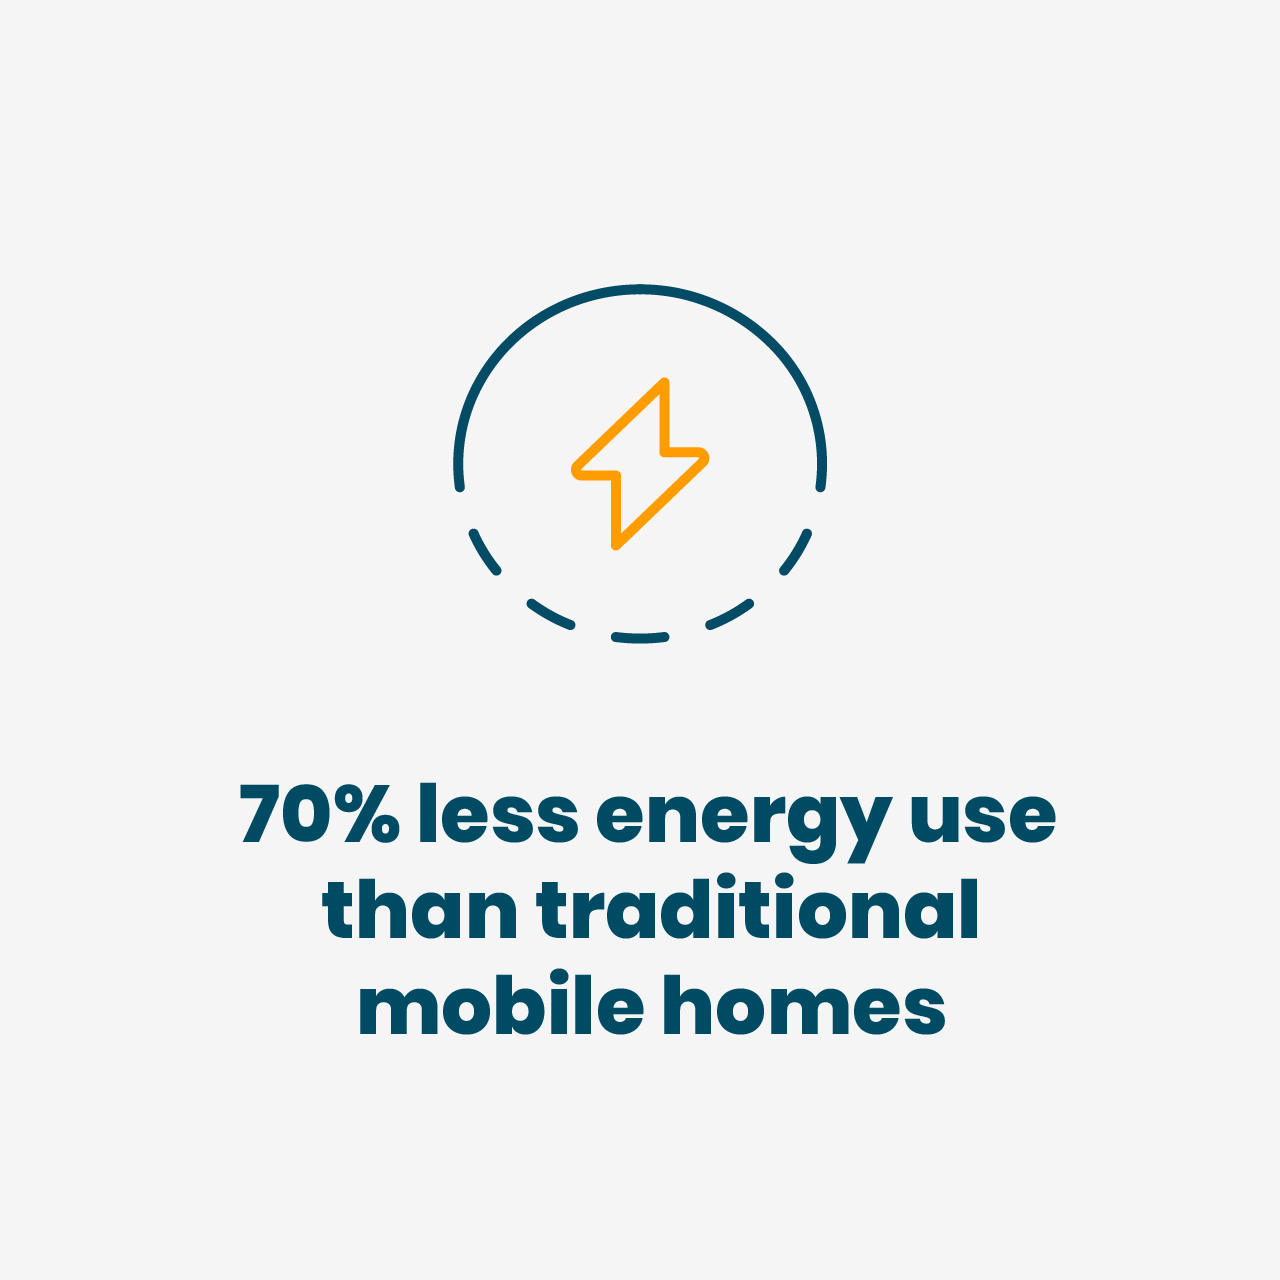 70% less energy use than traditional mobile homes